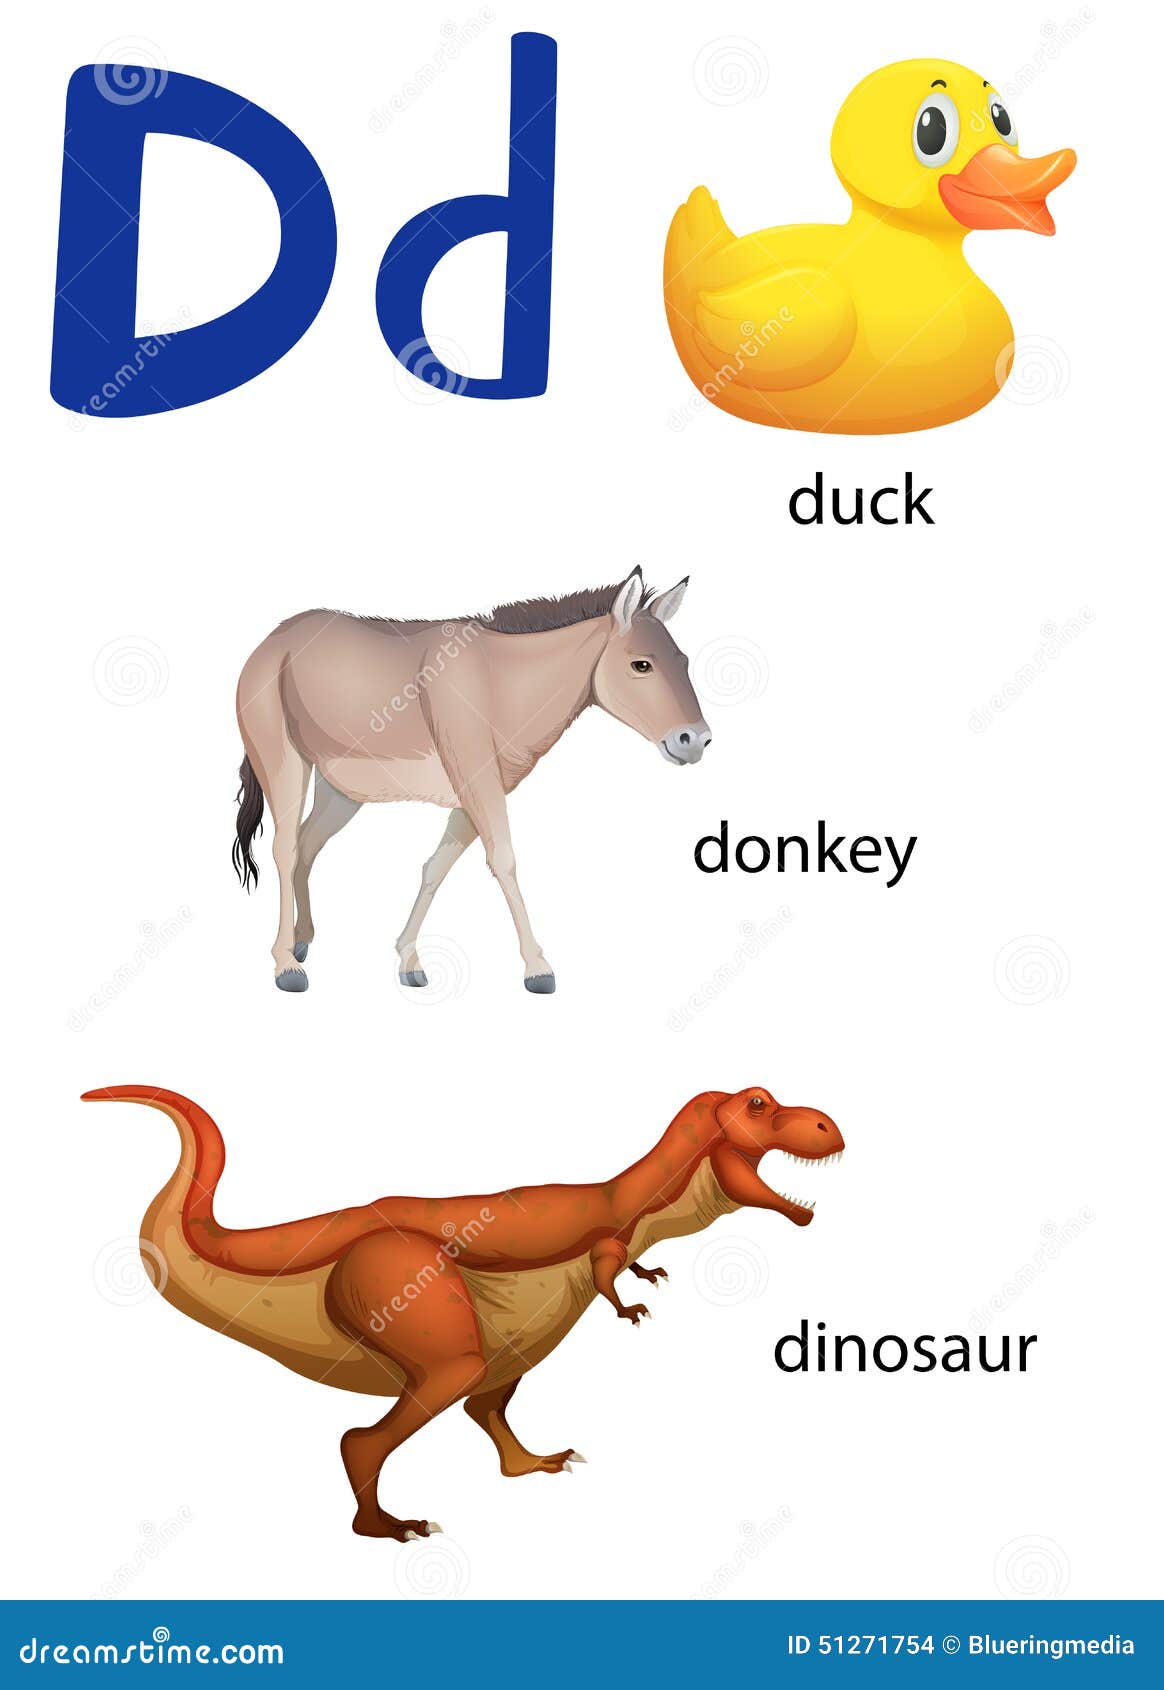 Letter D For Duck, Donkey And Dinosaur Stock Vector - Image: 51271754